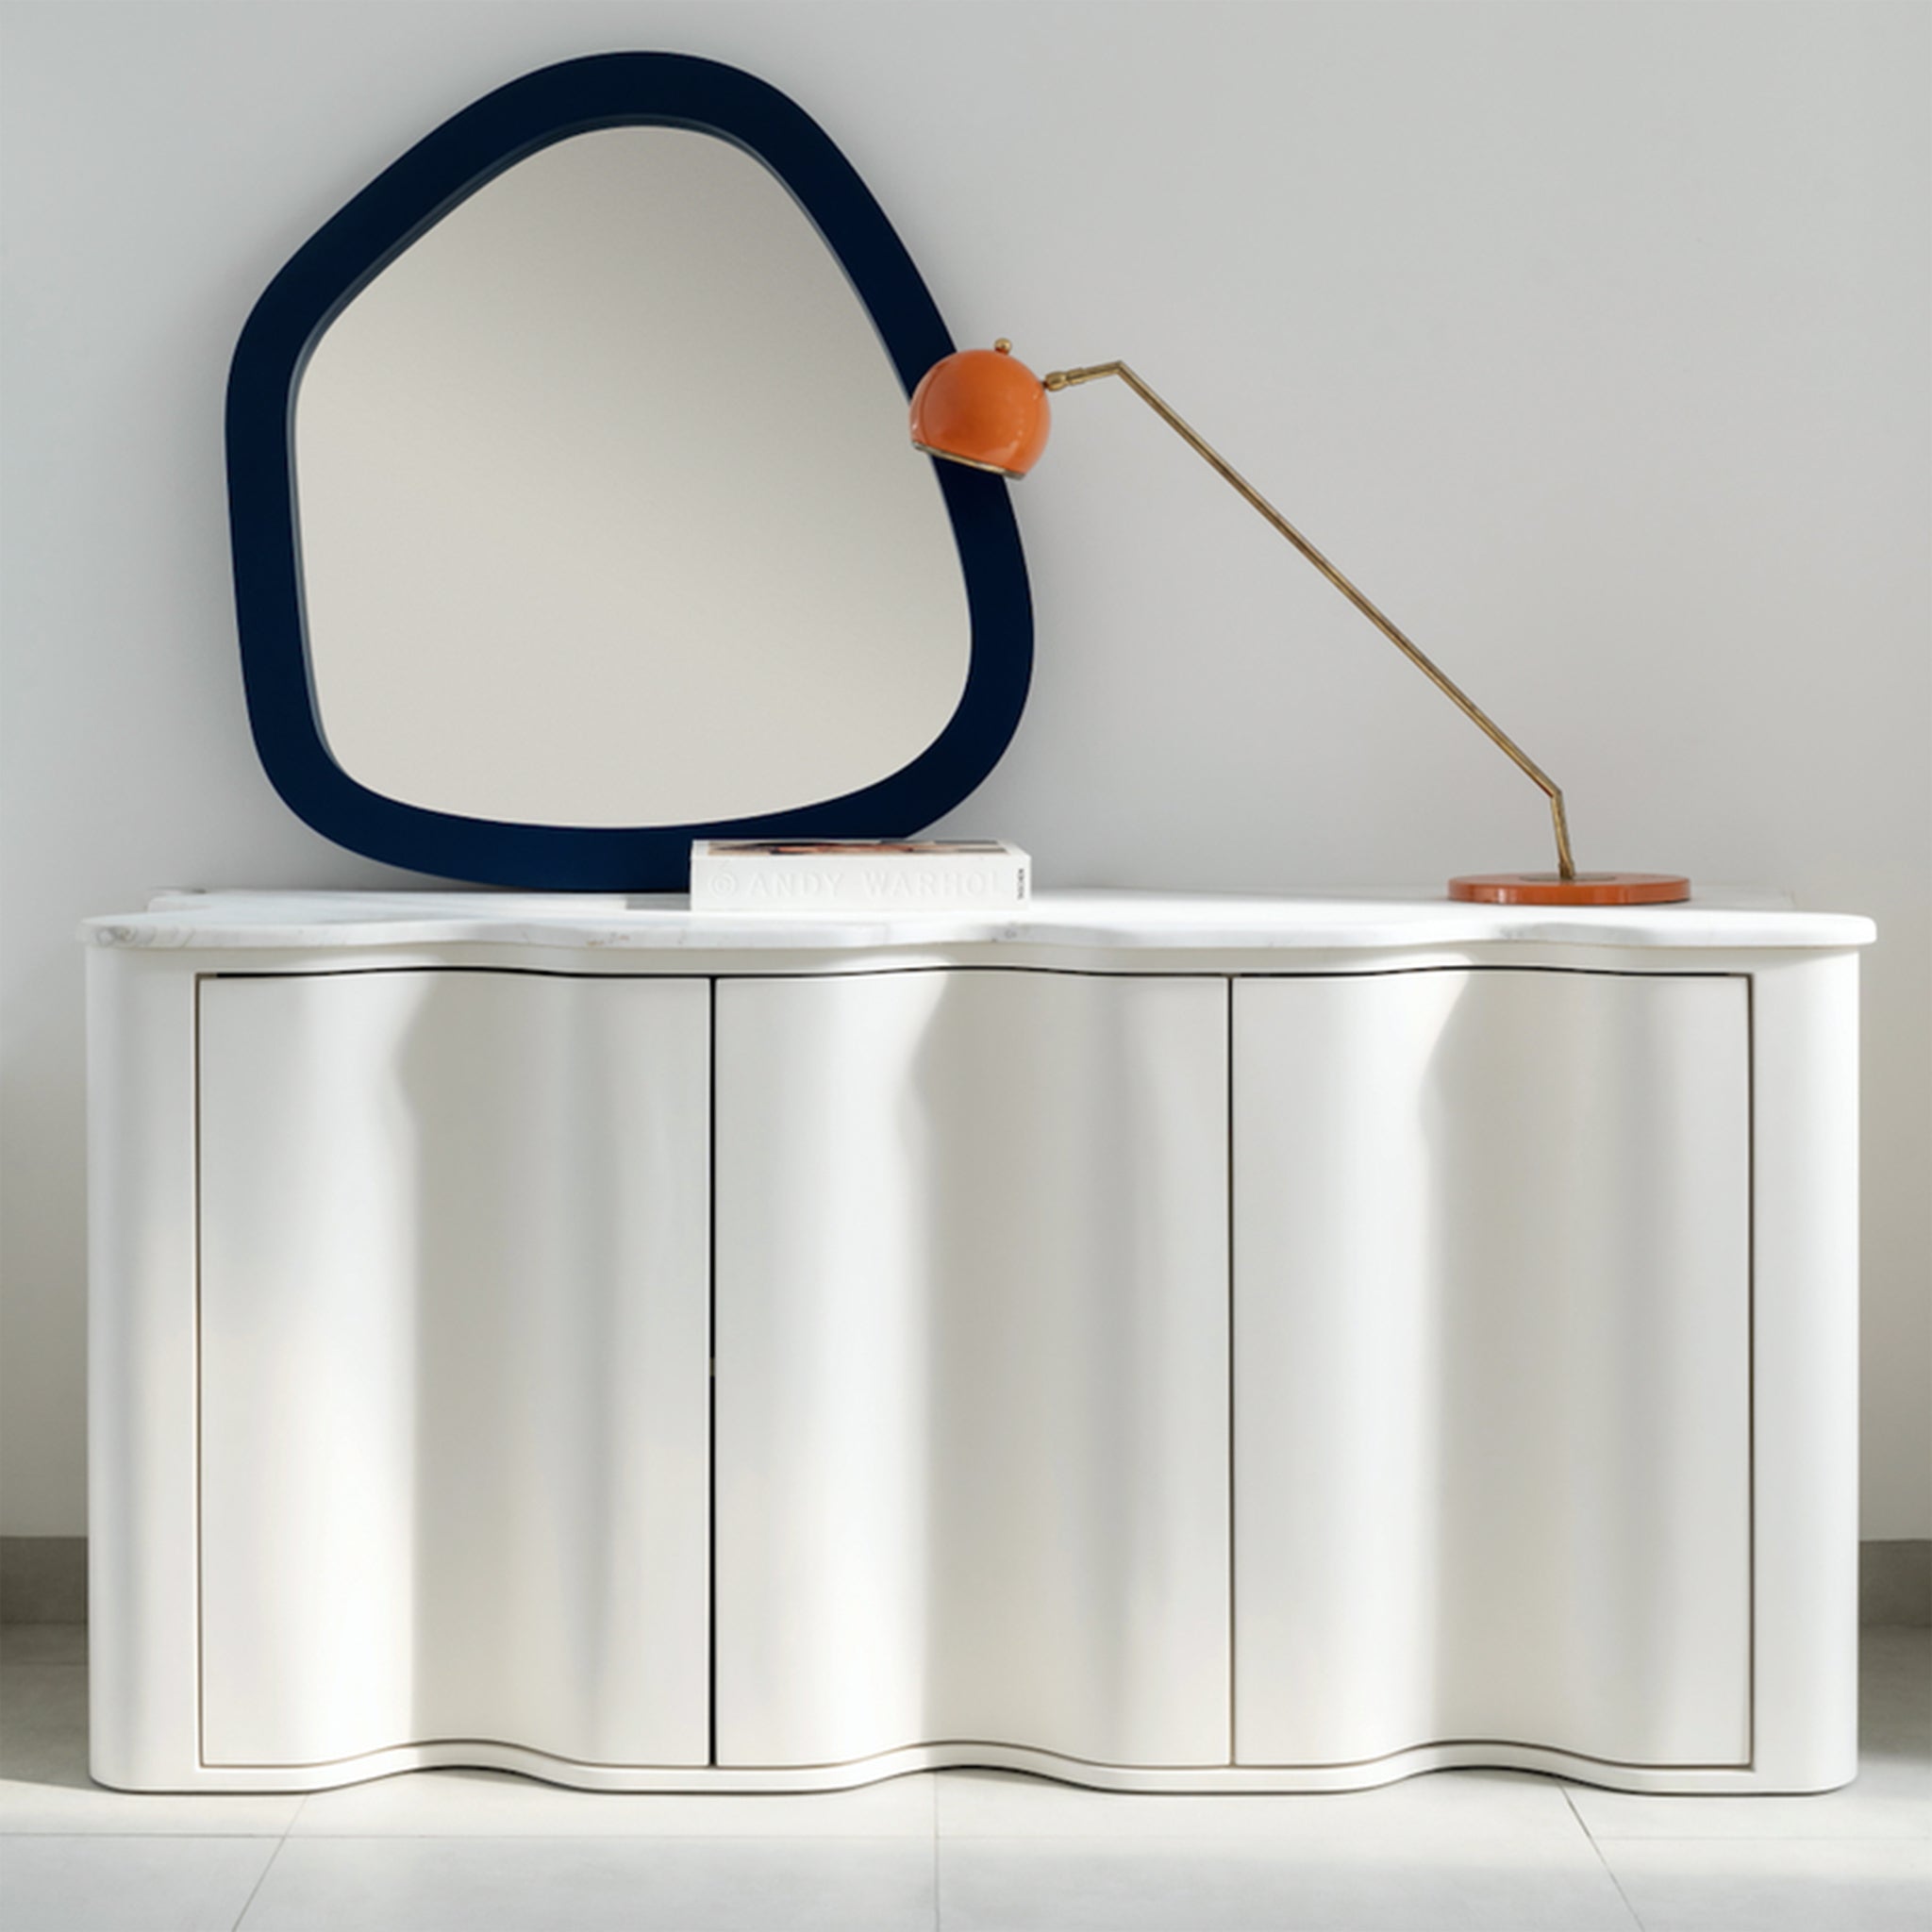 A modern sideboard with a wavy front design and a white marble top, decorated with an abstract mirror, an orange desk lamp, and a book. The sideboard is placed against a light gray wall, showcasing a stylish and contemporary aesthetic.